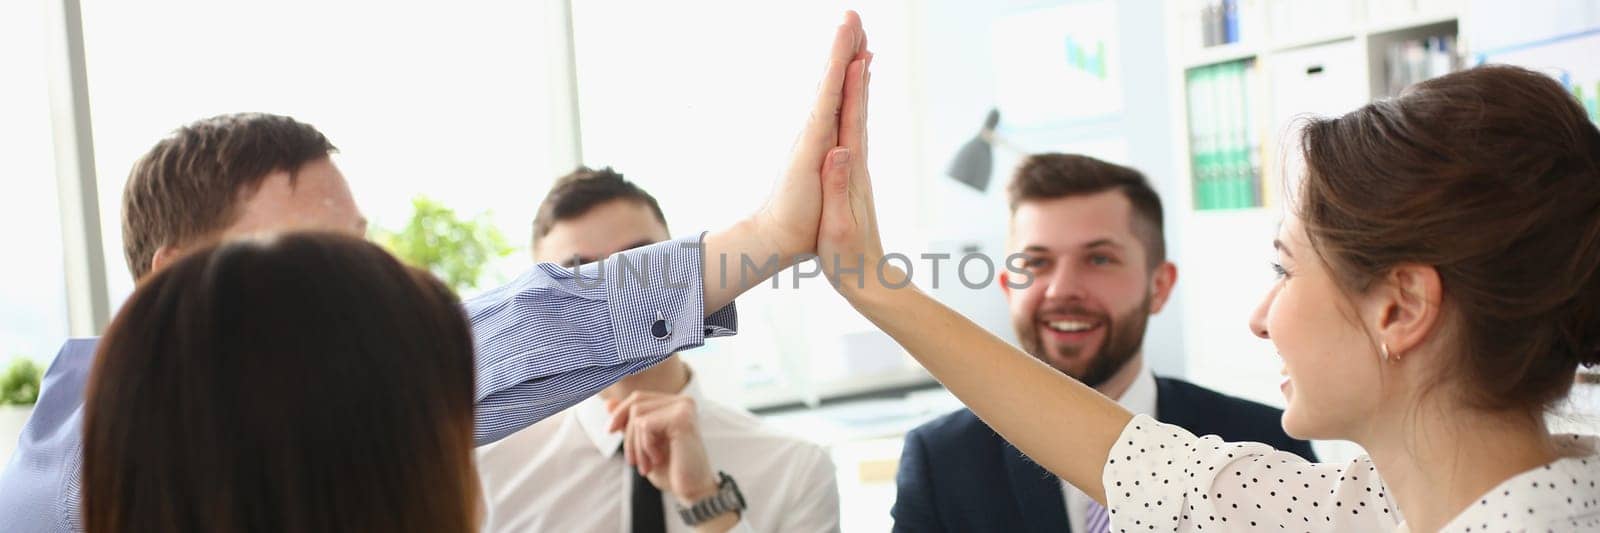 Enthusiastic teammates high-fives celebrate shared accomplishments and corporate success. Business people gathered at group meeting and team building concept